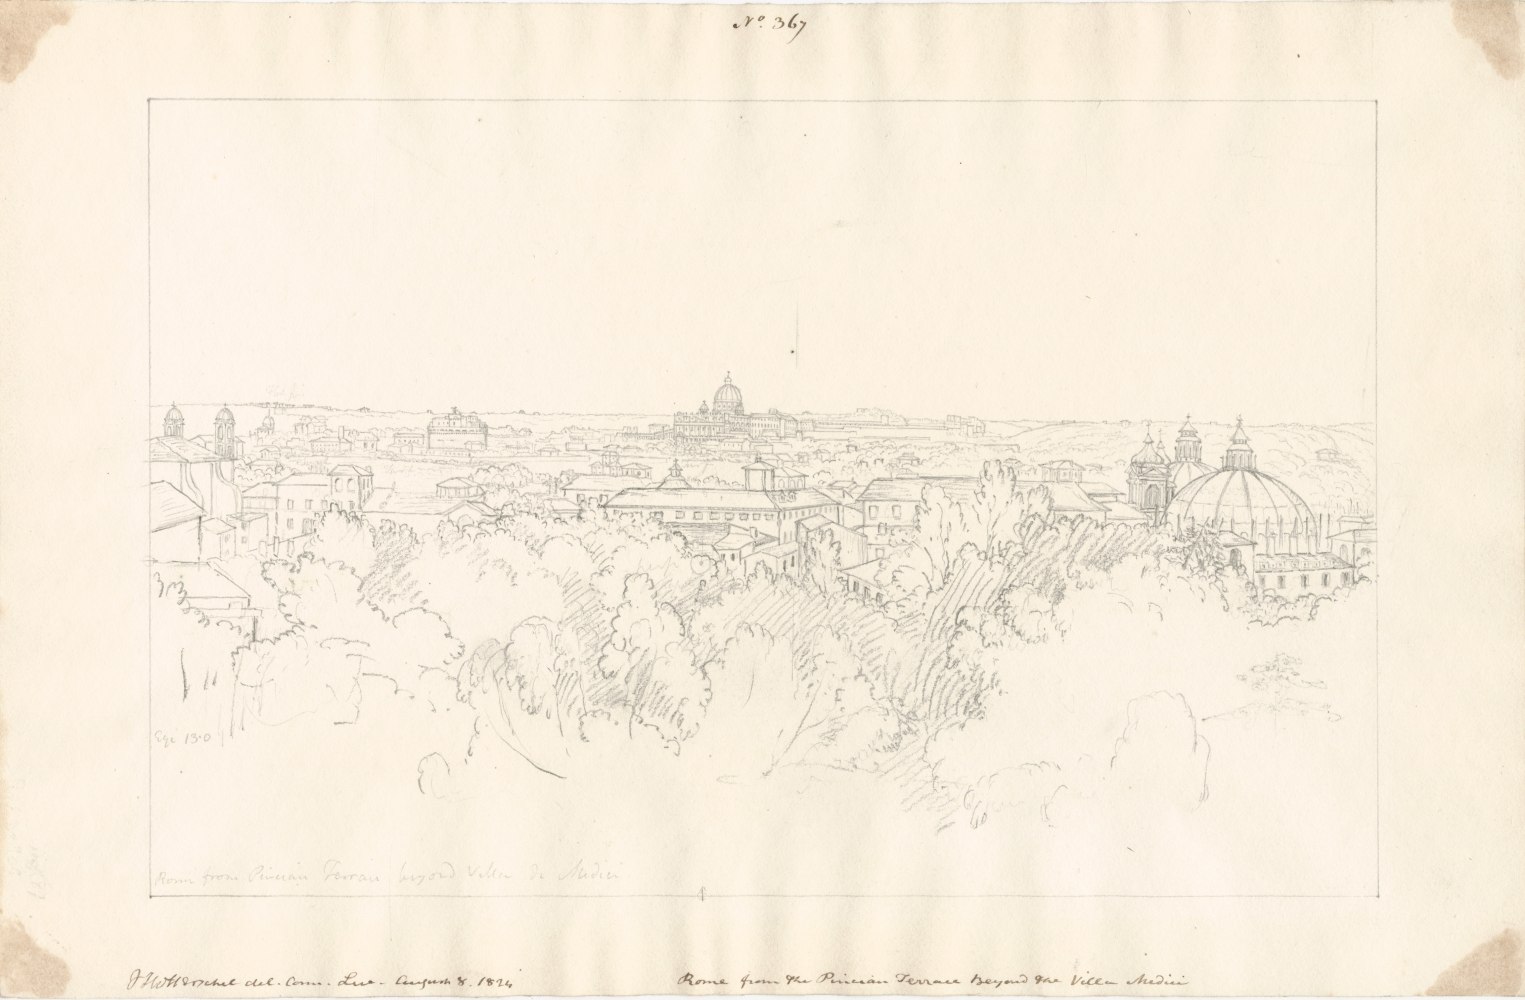 Sir John Frederick William HERSCHEL (English, 1792-1872) &quot;Rome from the Pincian Terrace beyond the Villa Medici&quot;, 8 August 1824 Camera lucida drawing, pencil on paper 25.2 x 38.7 cm Signed, titled and annotated “No. 367 / JFW Herschel del.Cam.Luc. August 8, 1824 / Rome from the Pincian Terrace beyond the Villa Medici” in brown ink; “ Egi [?] 13.0 / Rome from the Pincian Terrace beyond Villa de Medici” in pencil. “Rome from the Pincian Terrace beyond Villa Medici / 2140” in pencil on verso.